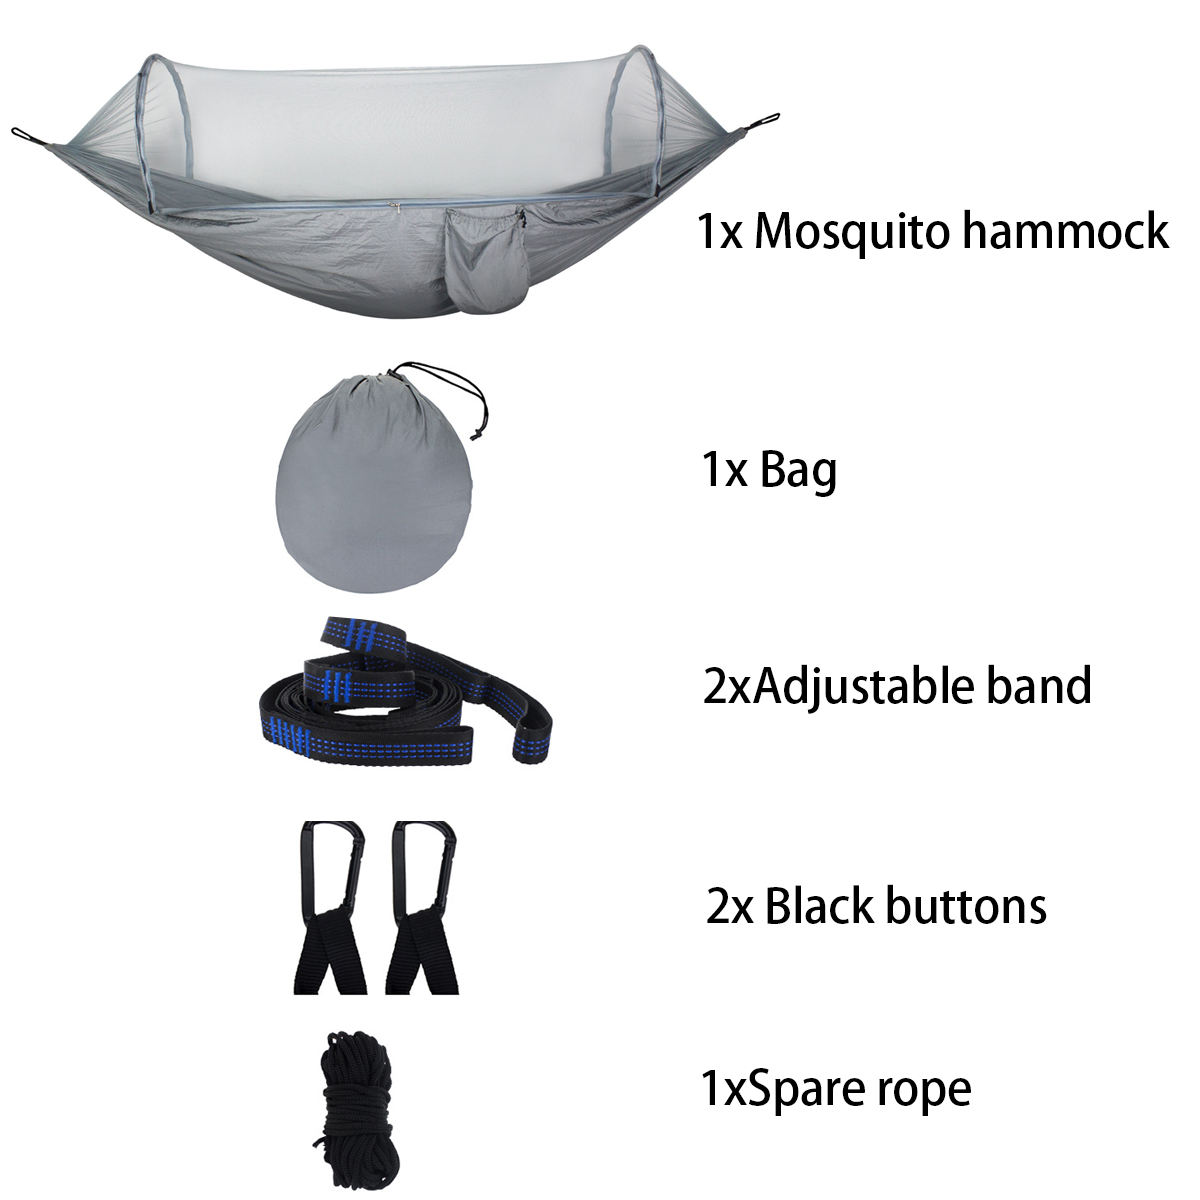 270x140cm-Auto-Quick-Open-Hammock-Outdoor-Camping-Hanging-Swing-Bed-With-Mosquito-Net-Max-Load-250kg-1549846-4